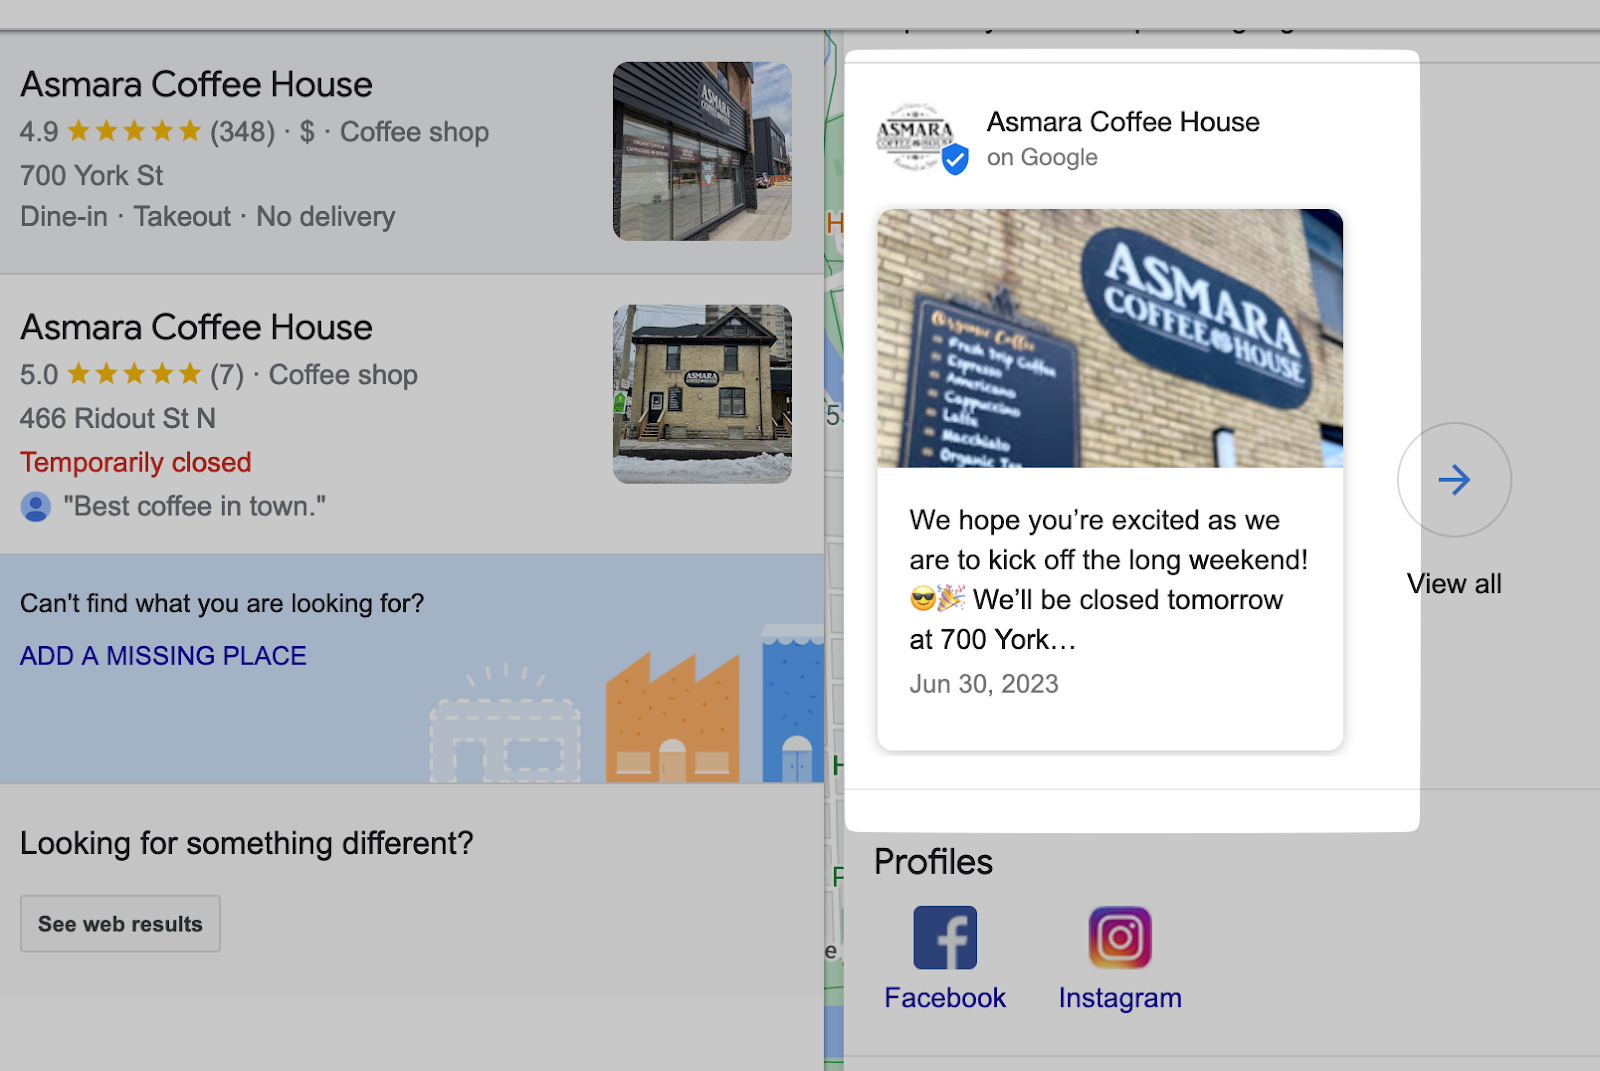 An example of a Google post showing on Asmara Coffee House business profile